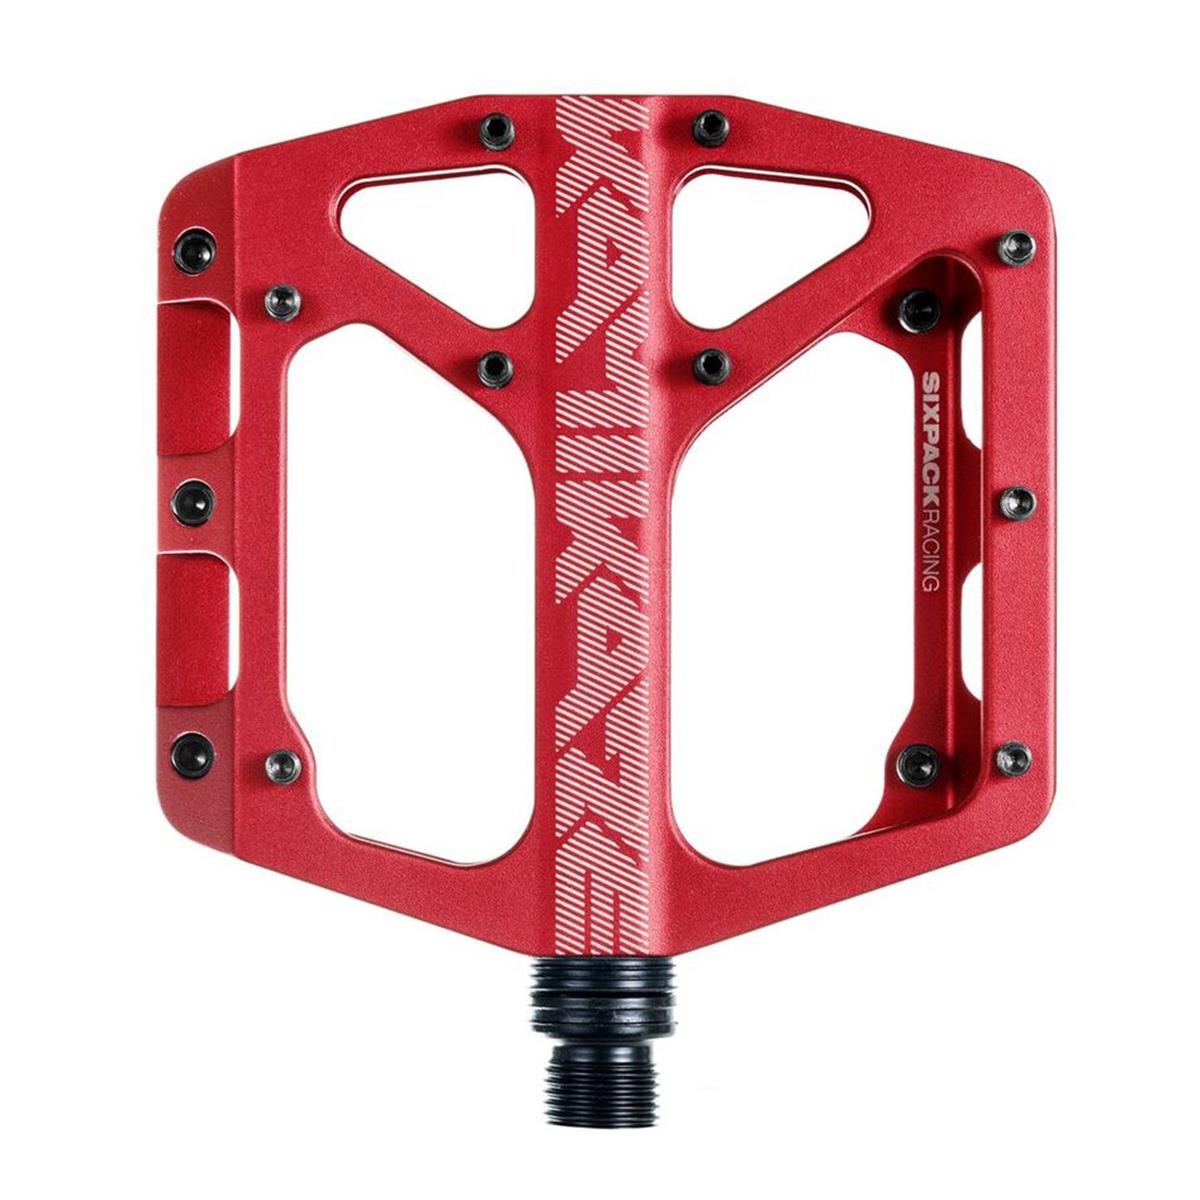 Sixpack Pedals Kamikaze 2.0 Red, 110x110 mm, 36 M4 Pins, 1 Pair